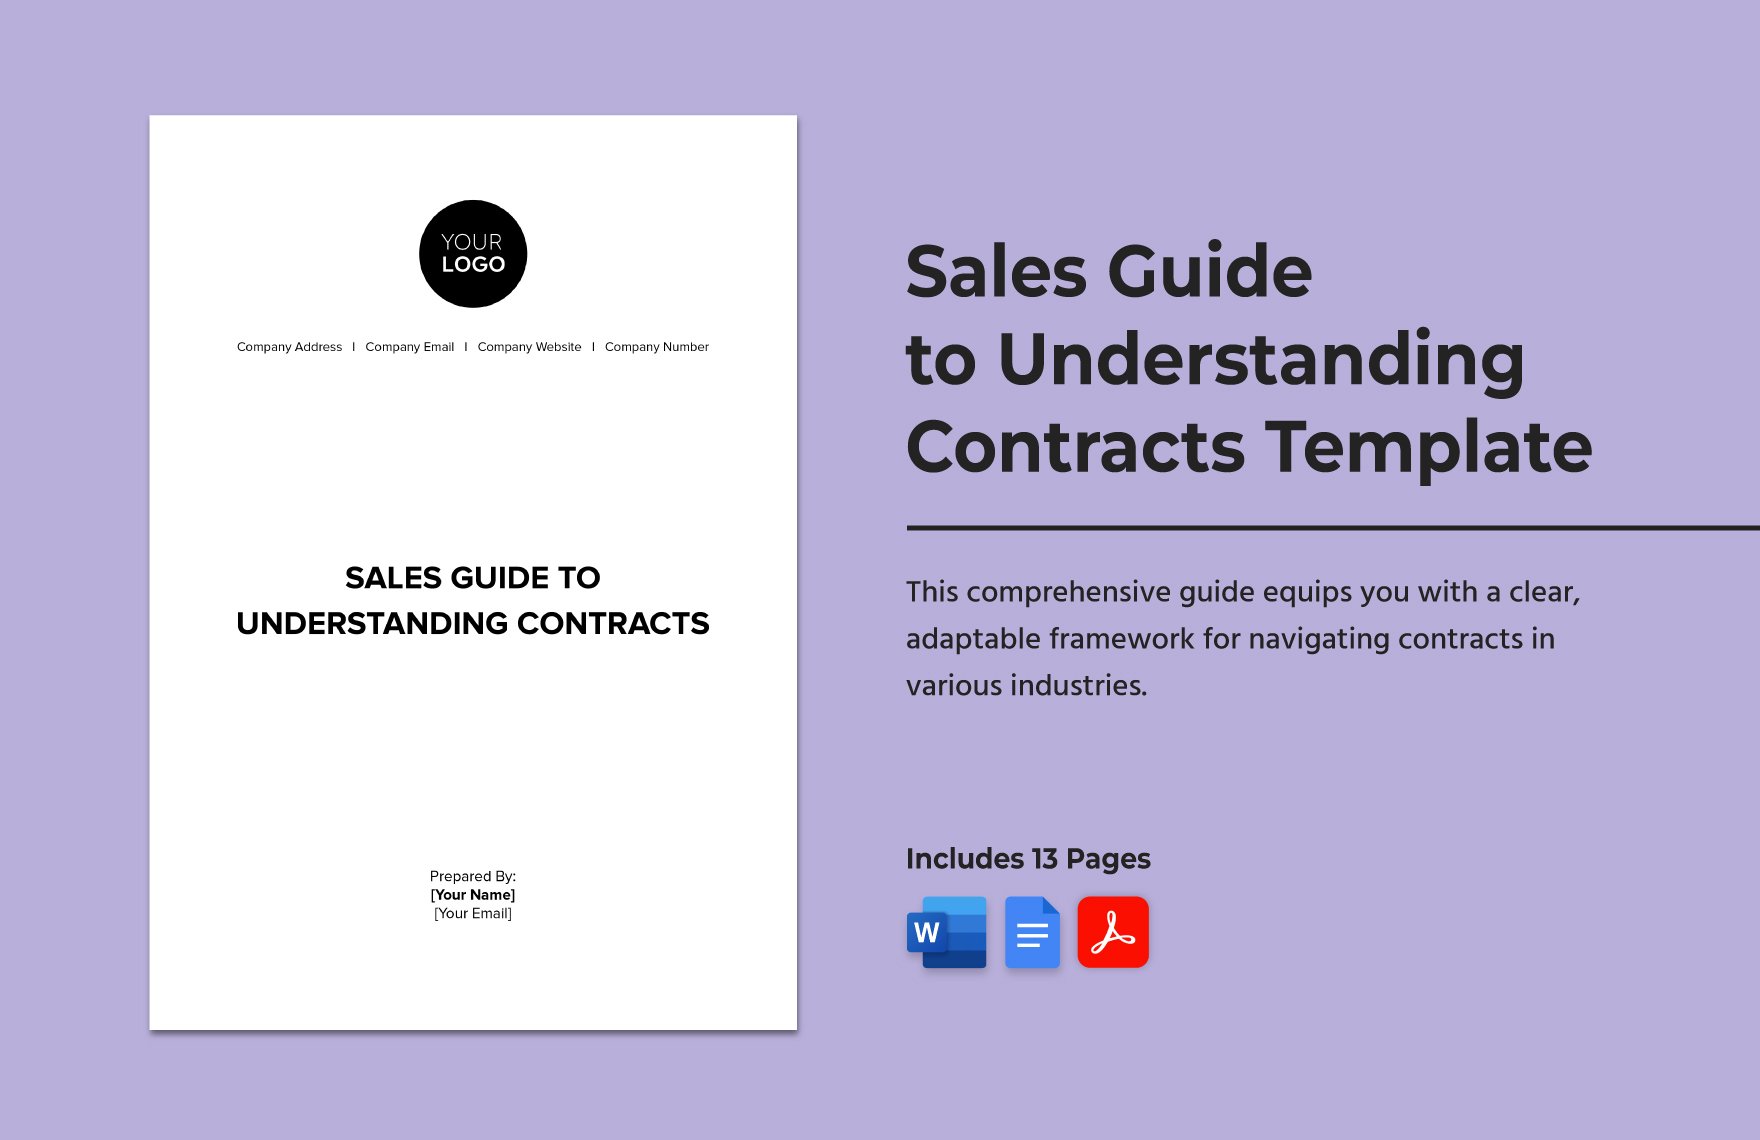 Sales Guide to Understanding Contracts Template